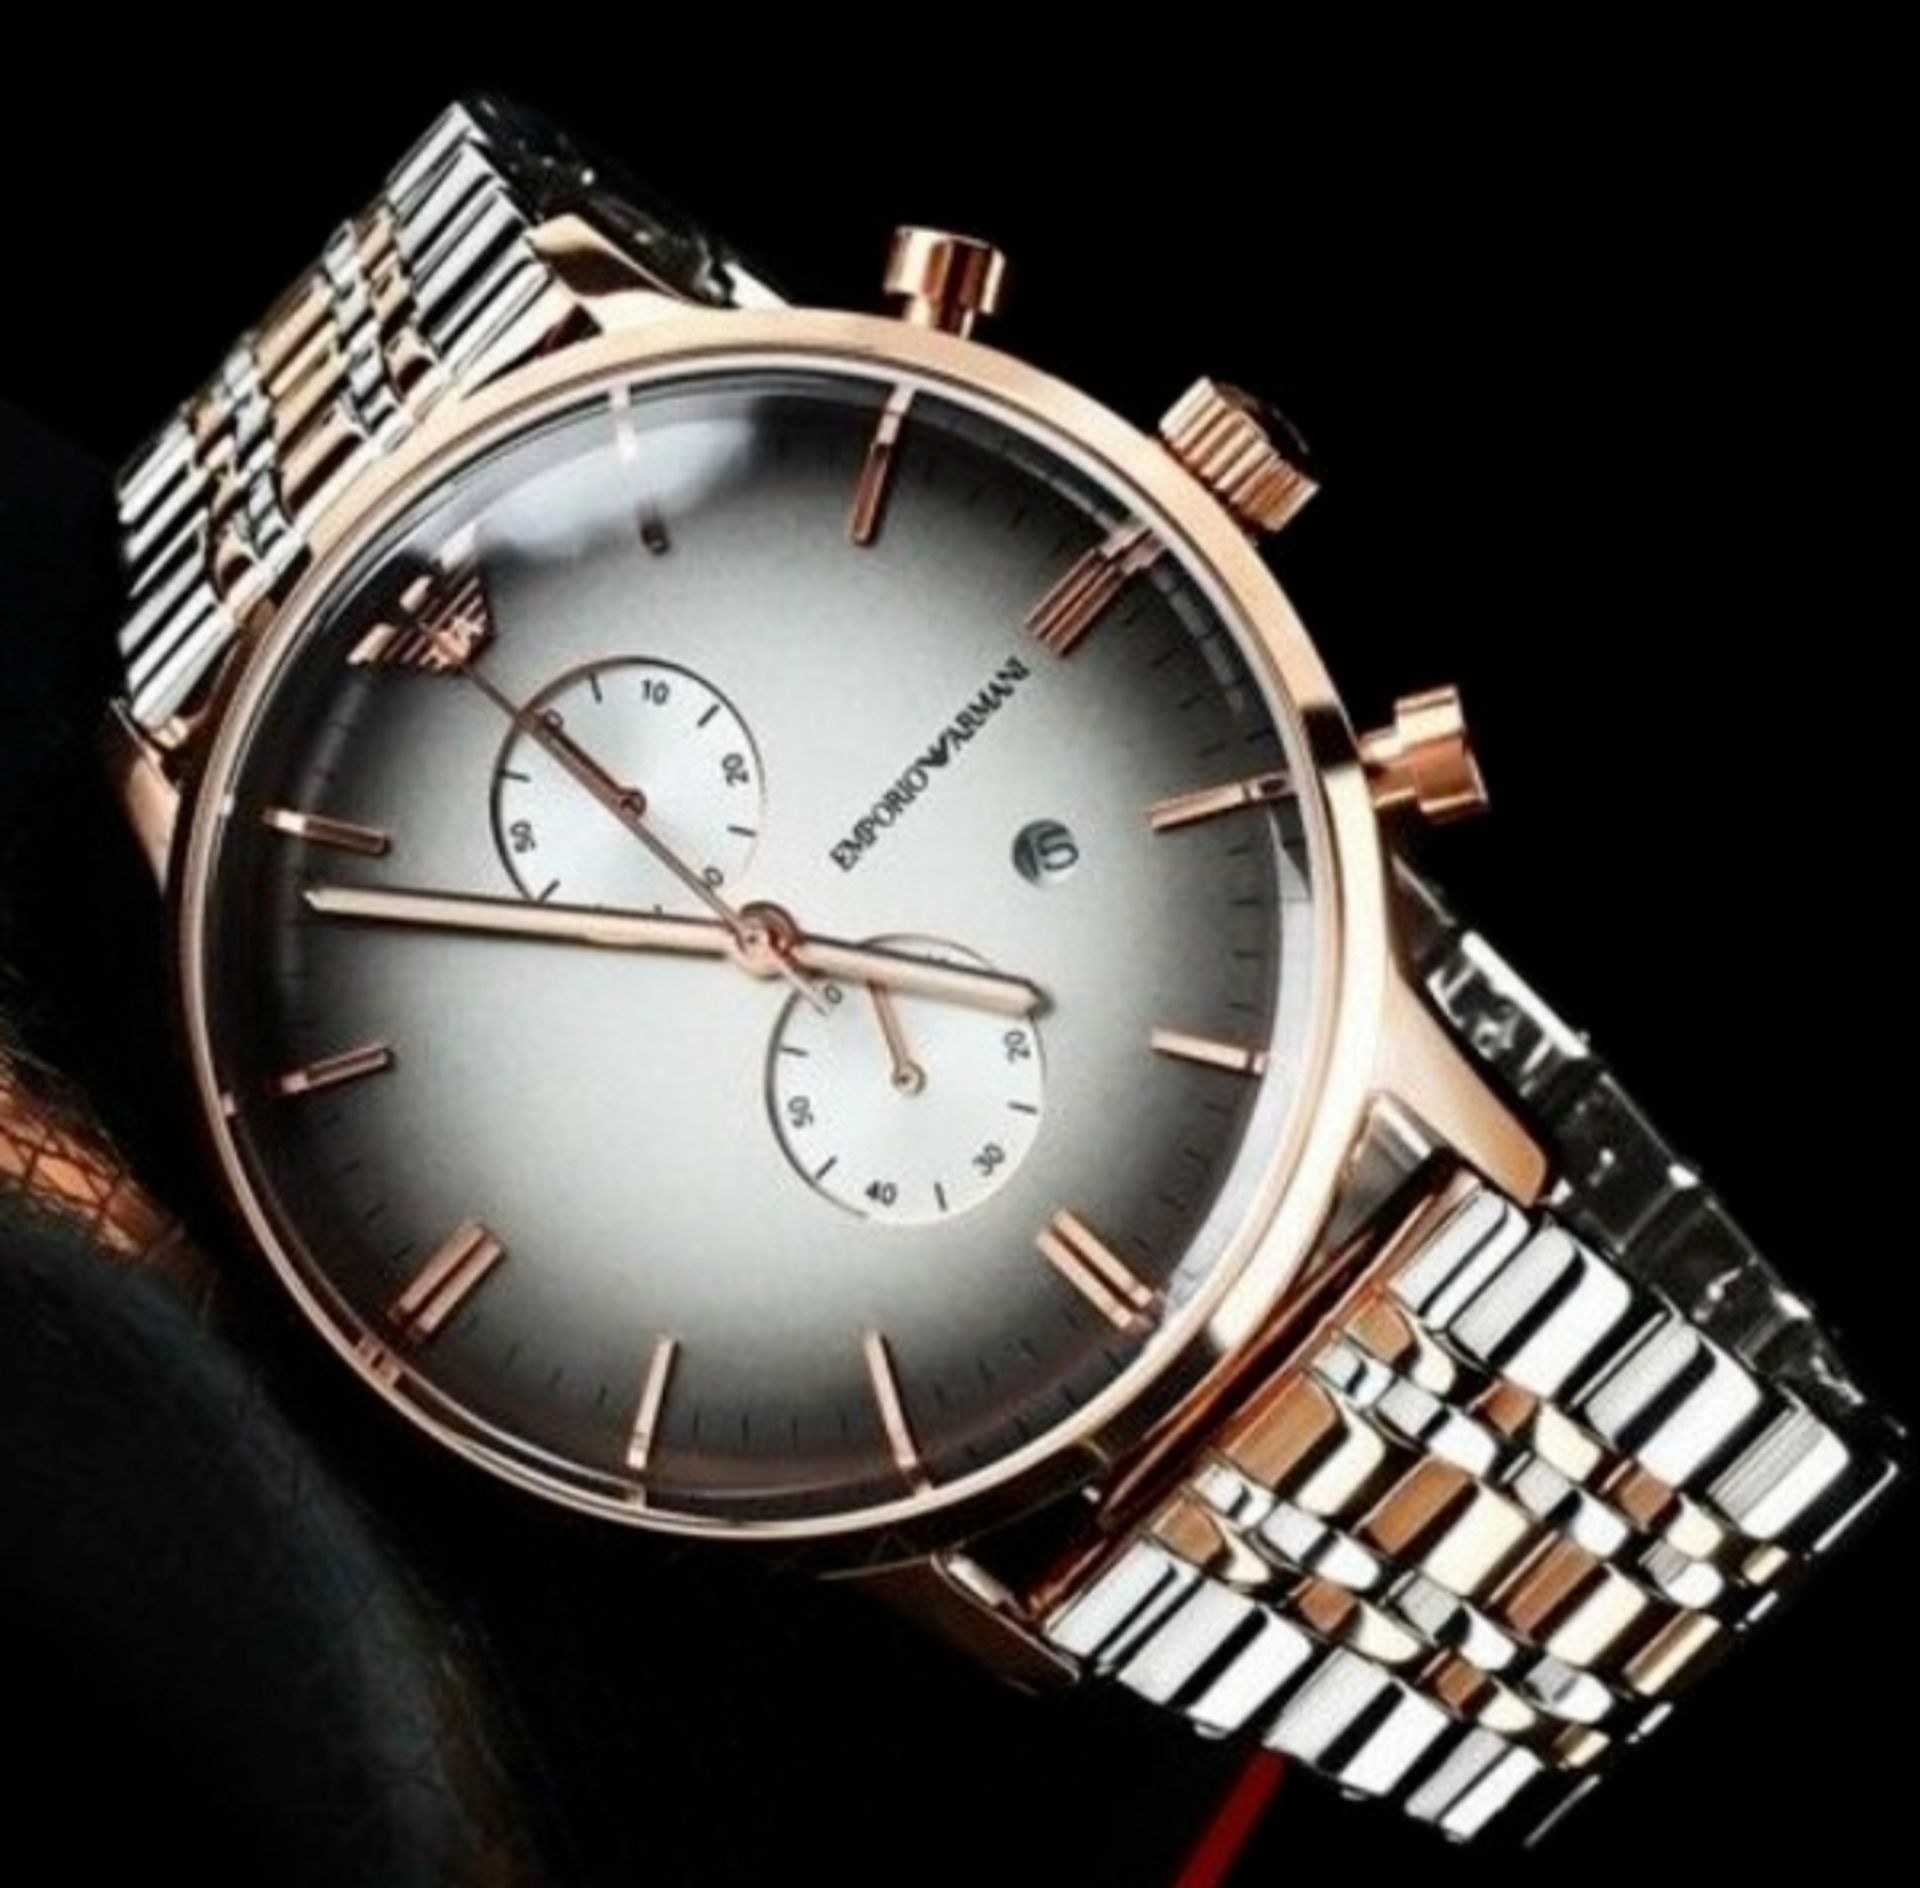 Emporio Armani AR1721 Men's Gianni Two Tone Rose Gold & Silver Chronograph Watch - Image 3 of 7